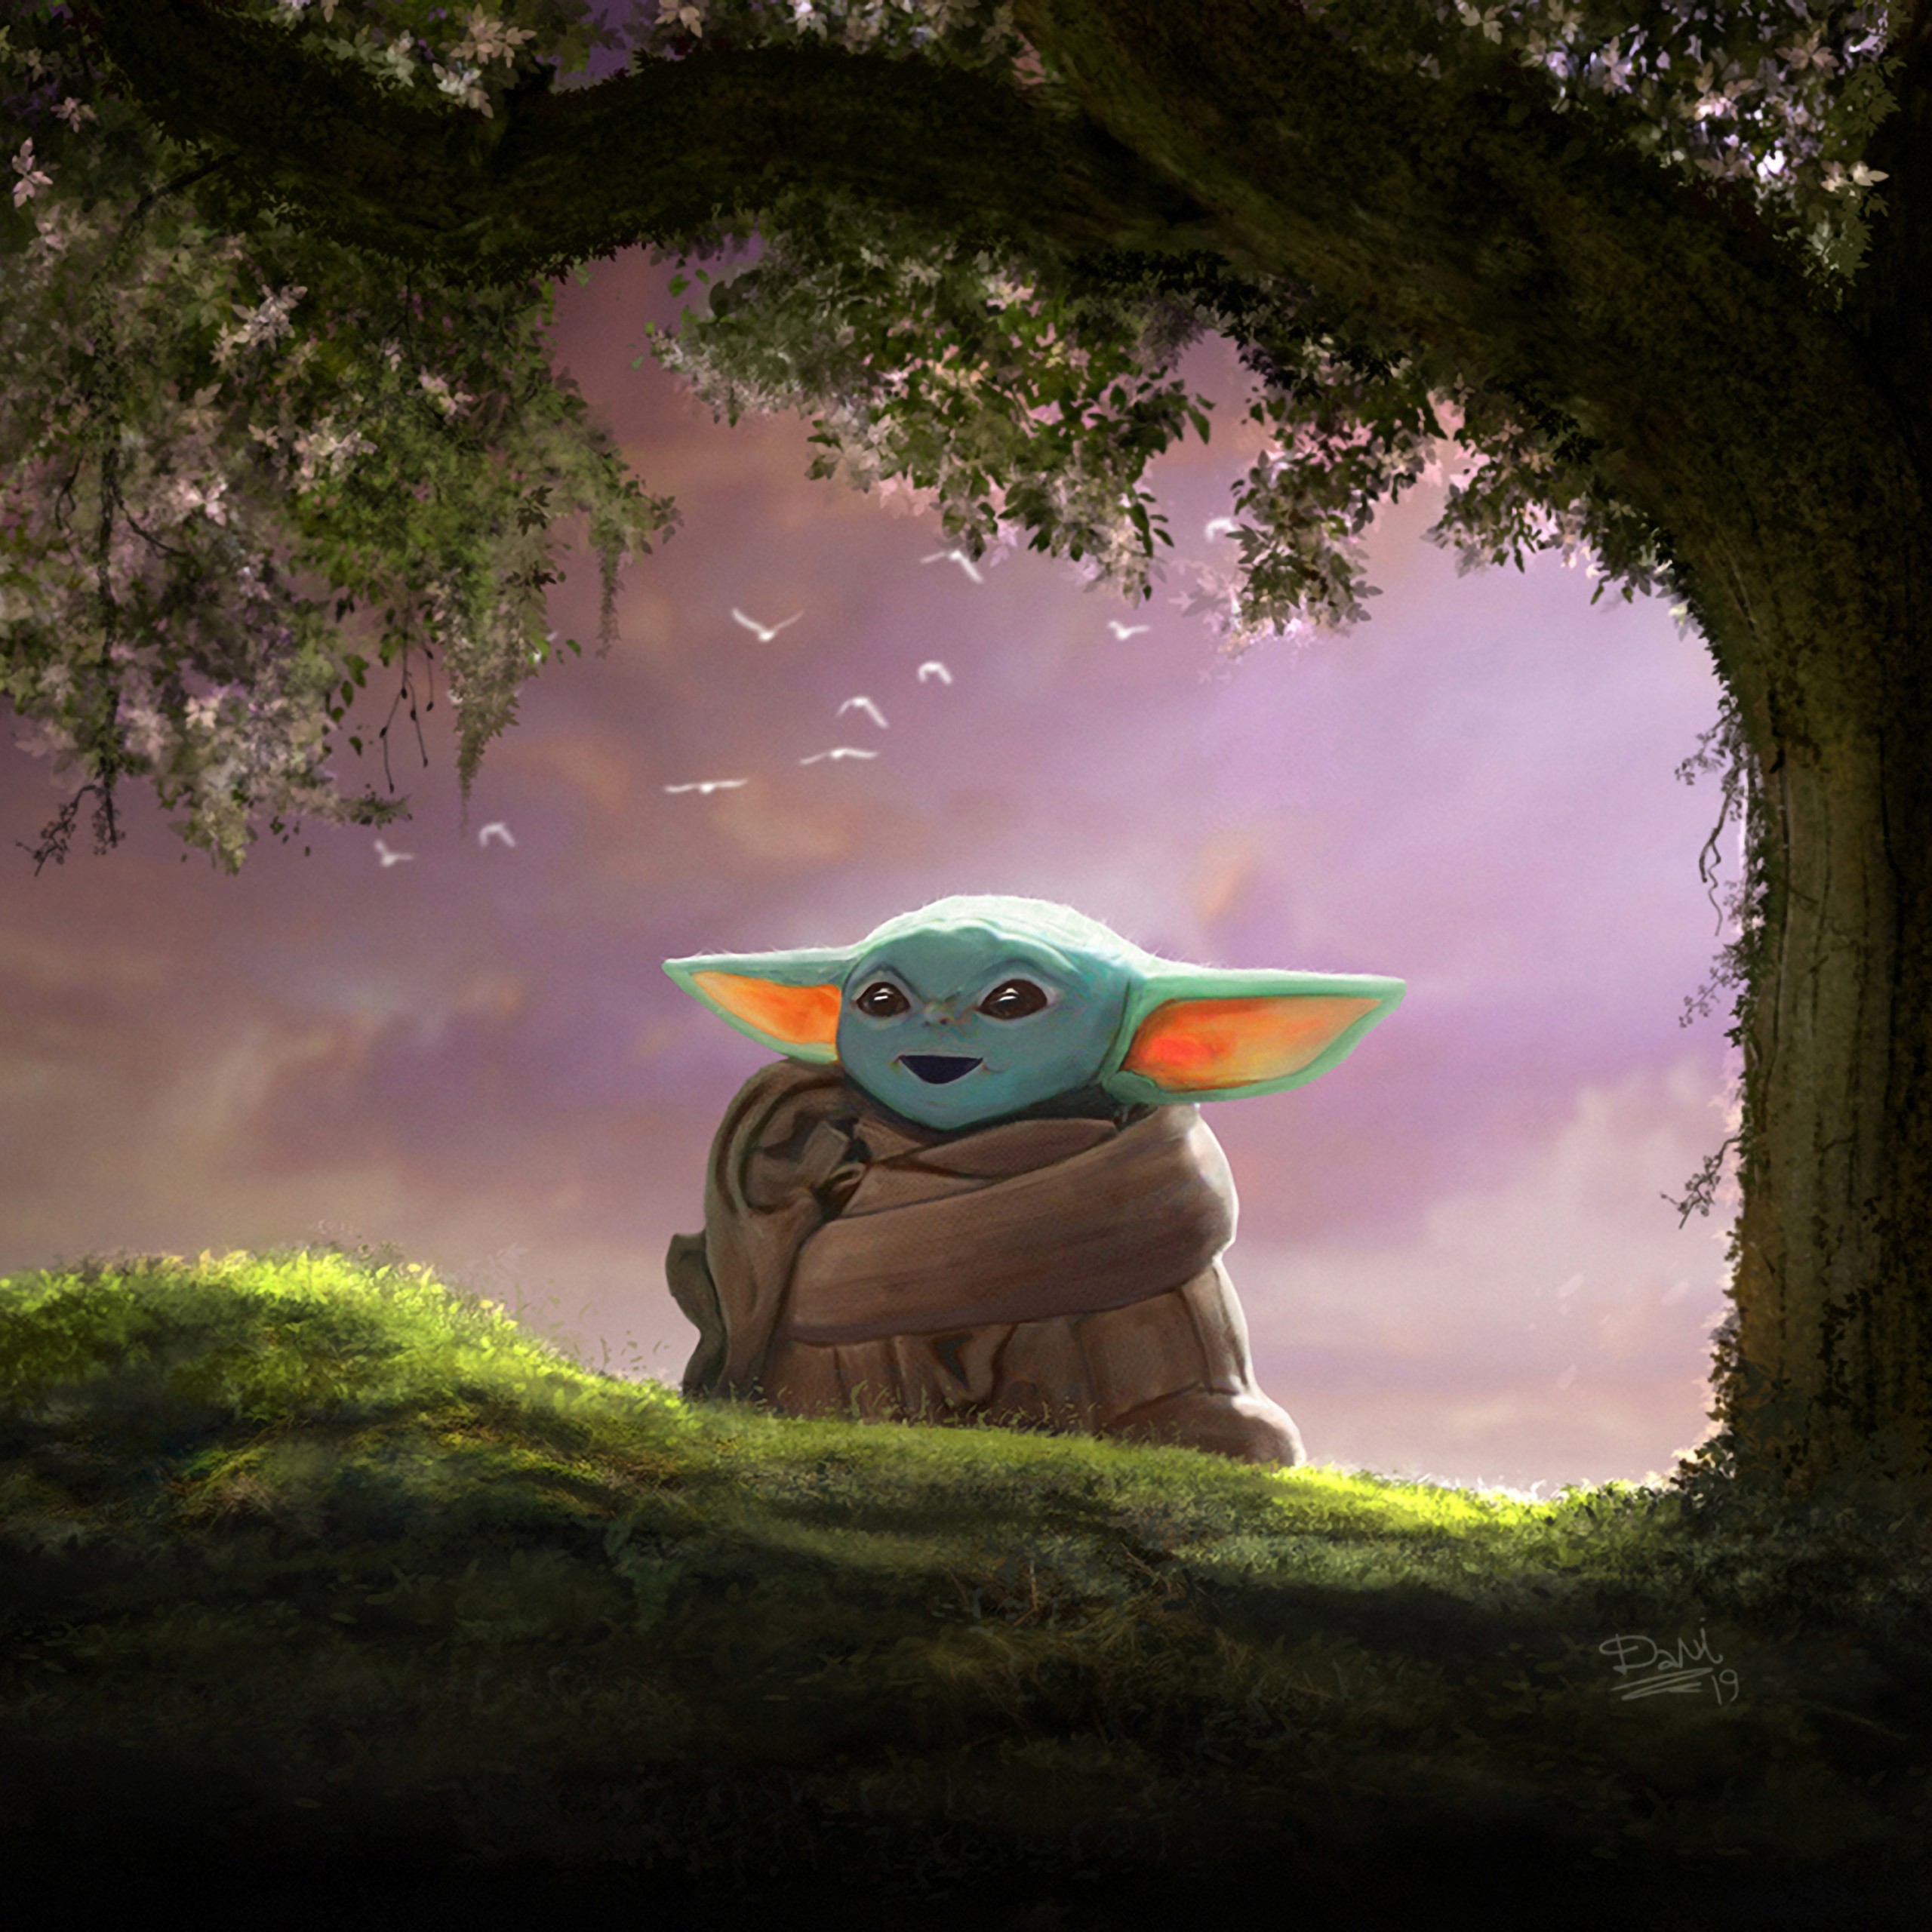 Wallpaper Weekends: The Child (Baby Yoda) Wallpapers for iPhone and iPad